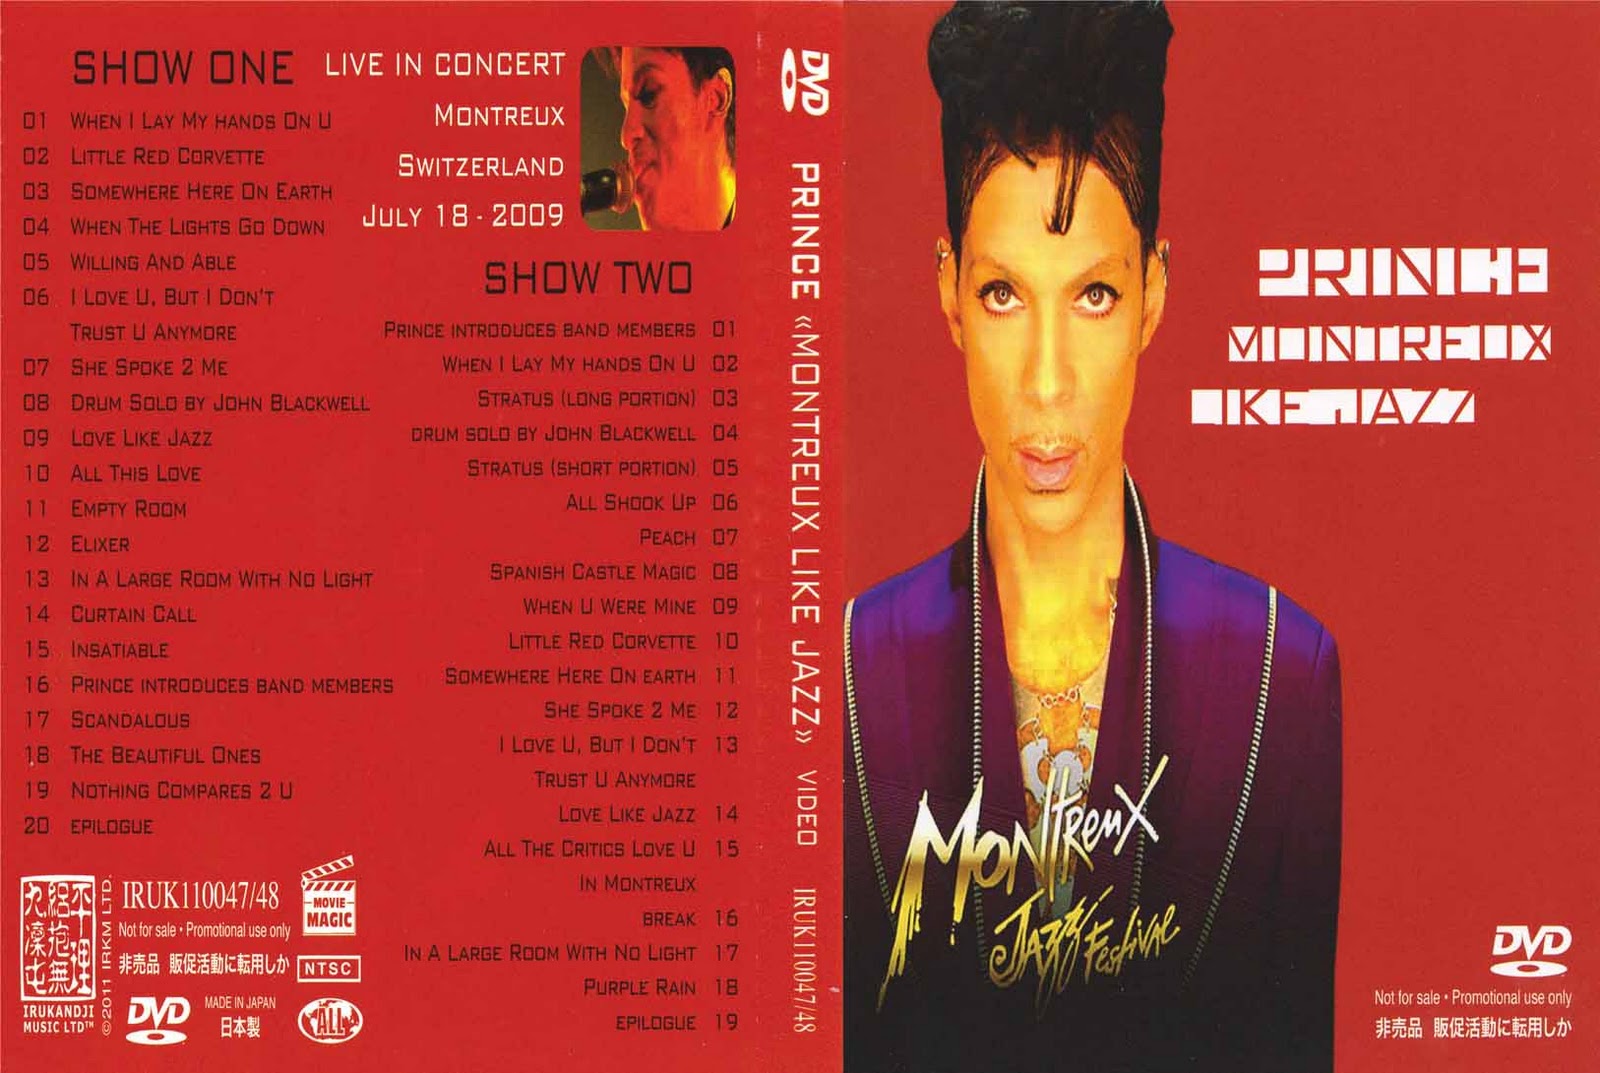 Live In Montreux [1996 TV Special]